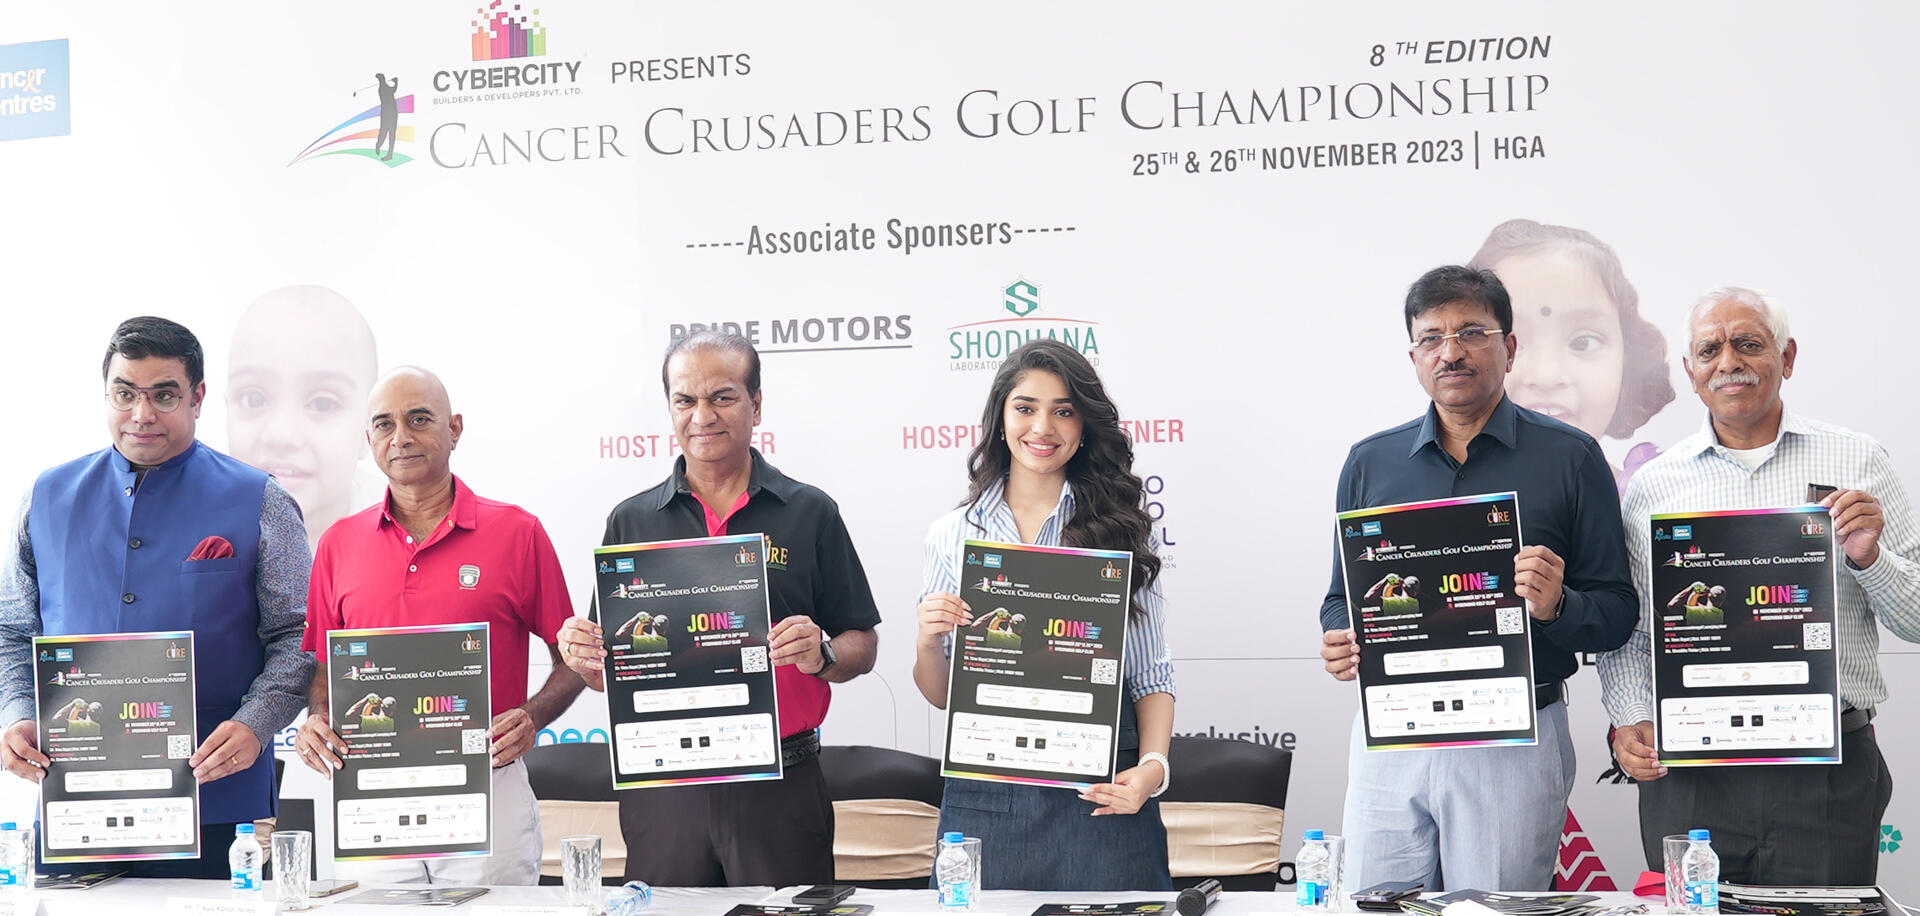 Tollywood Diva Krithi Shetty launches the Cybercity Cancer Crusaders Golf Championship by putting the golf ball, at HGA!